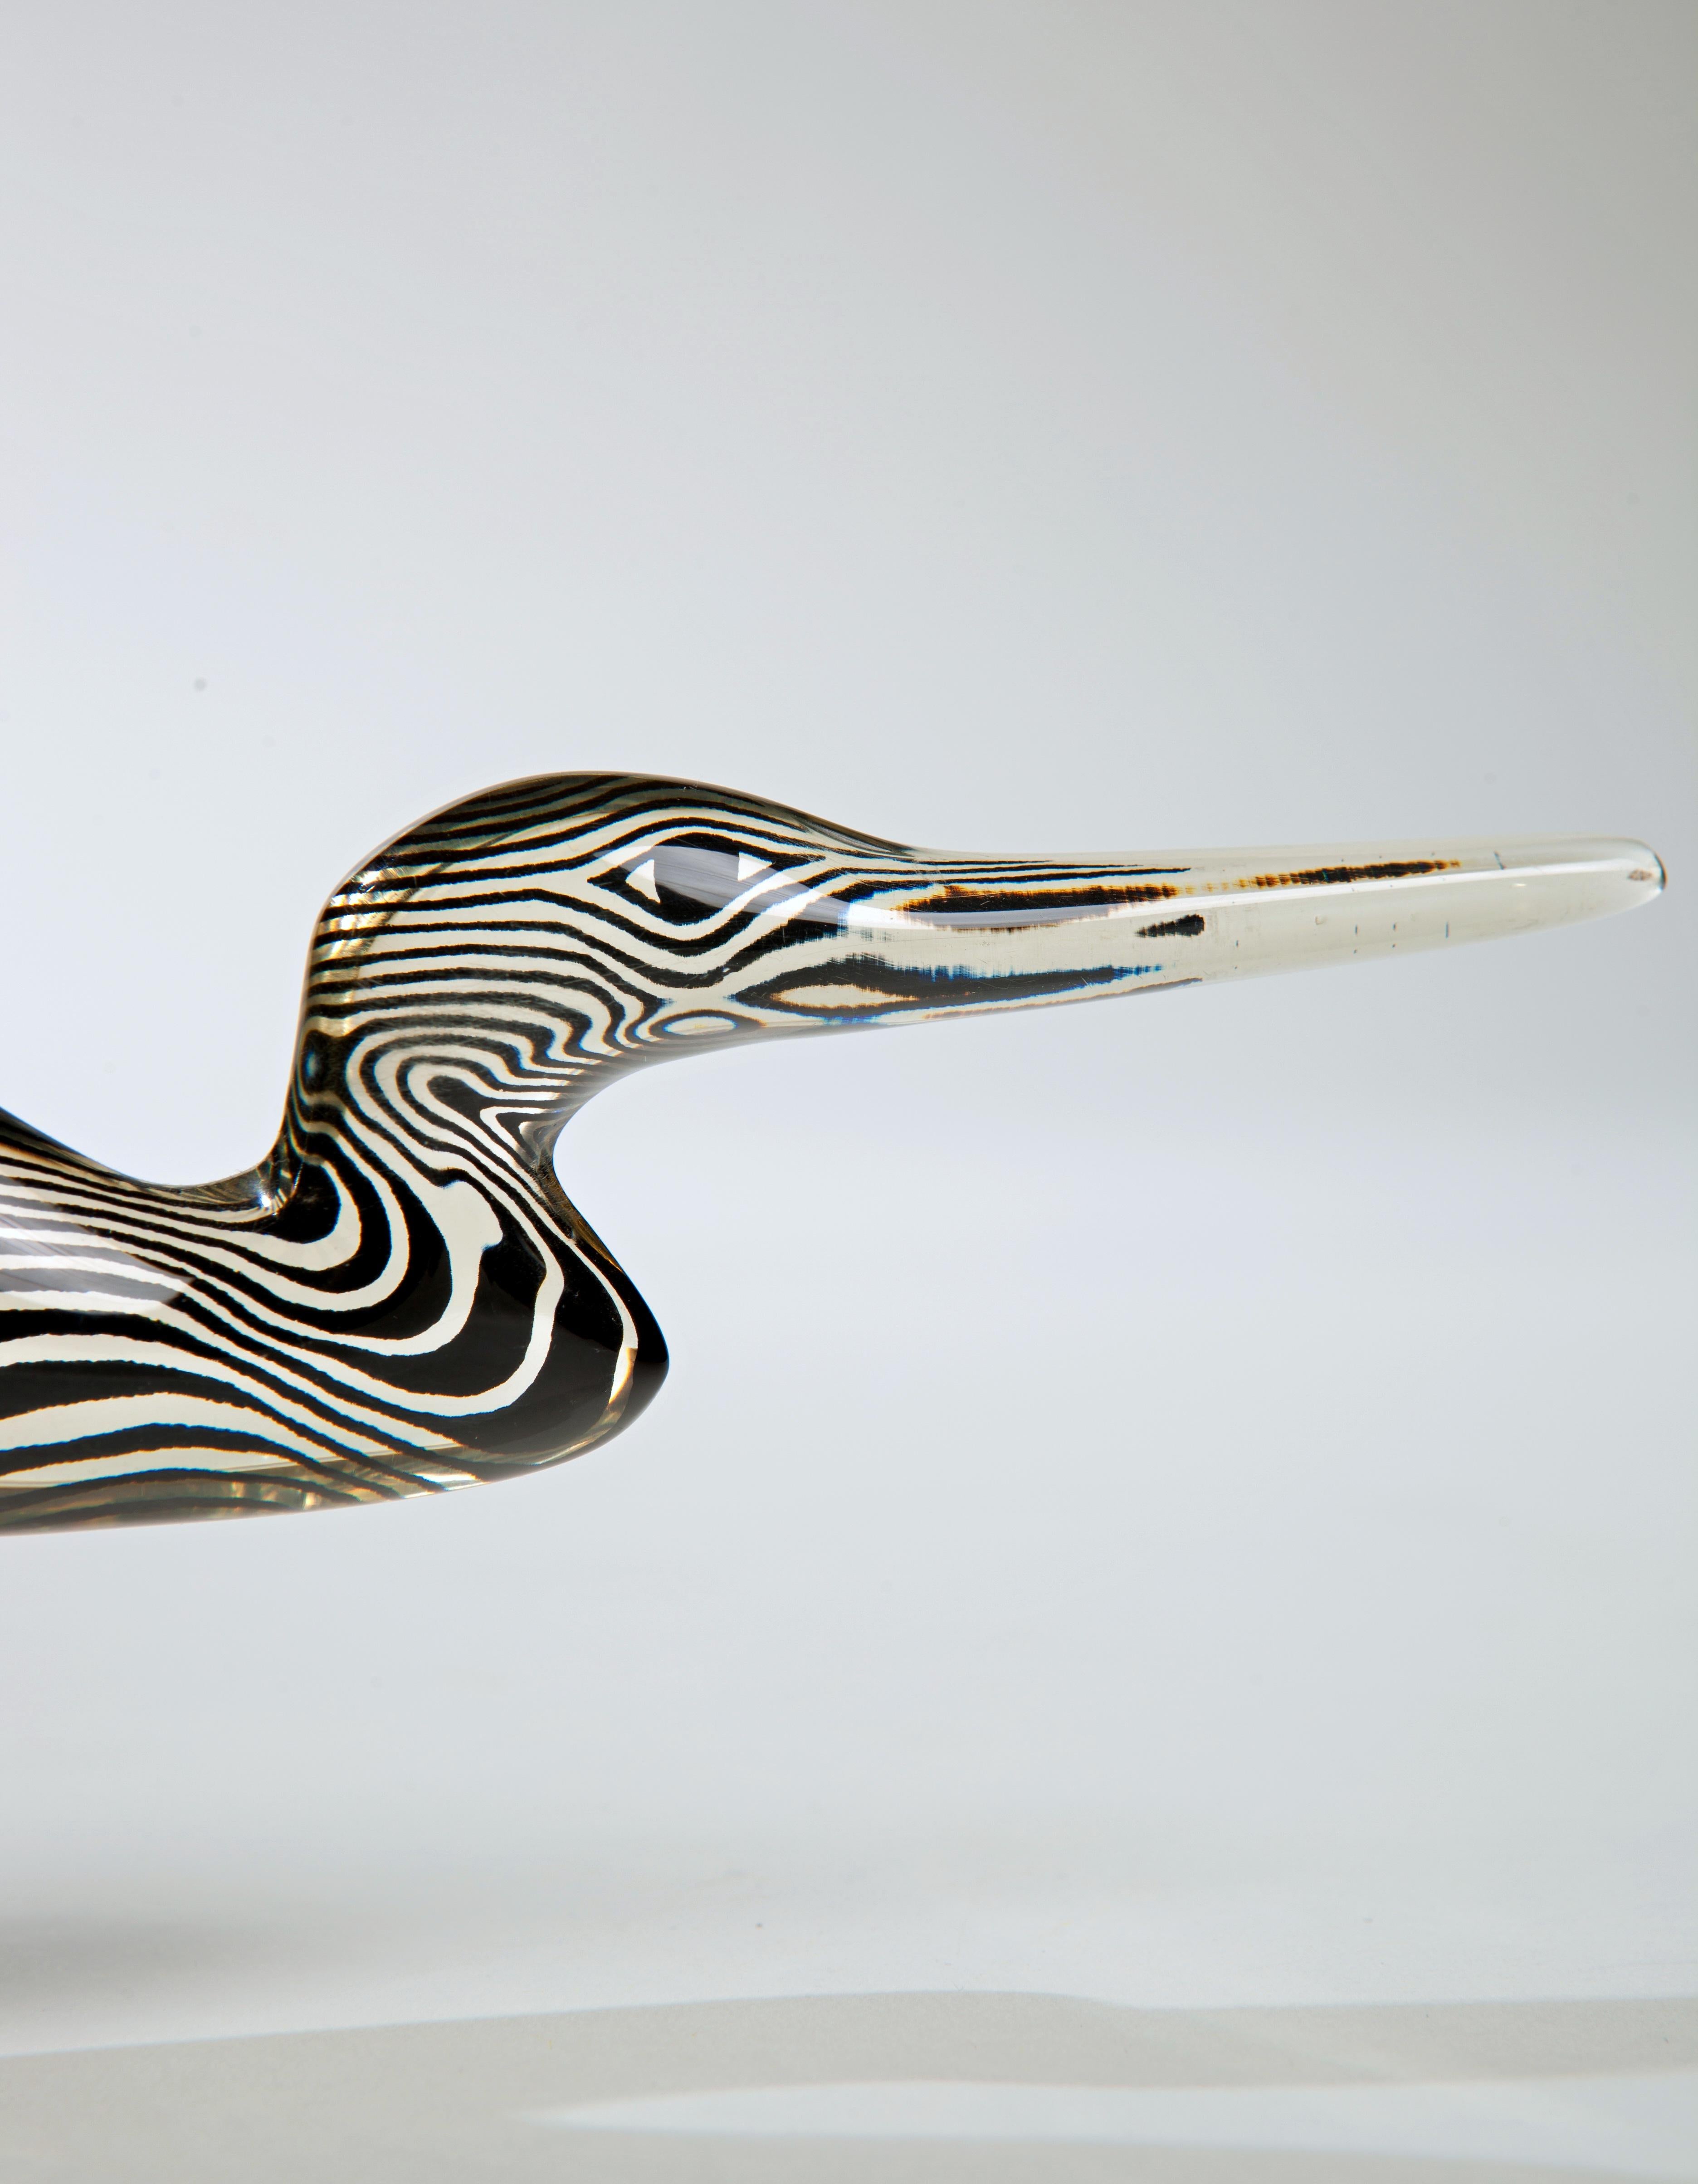 Fun and oh so very 1970s sculpture by Brazilian artist Abraham Palatnik (1928-2020). Lots of personality can be found in this duck in flight.

Palatnik is widely considered one of the most important Latin American abstract artists for his visually